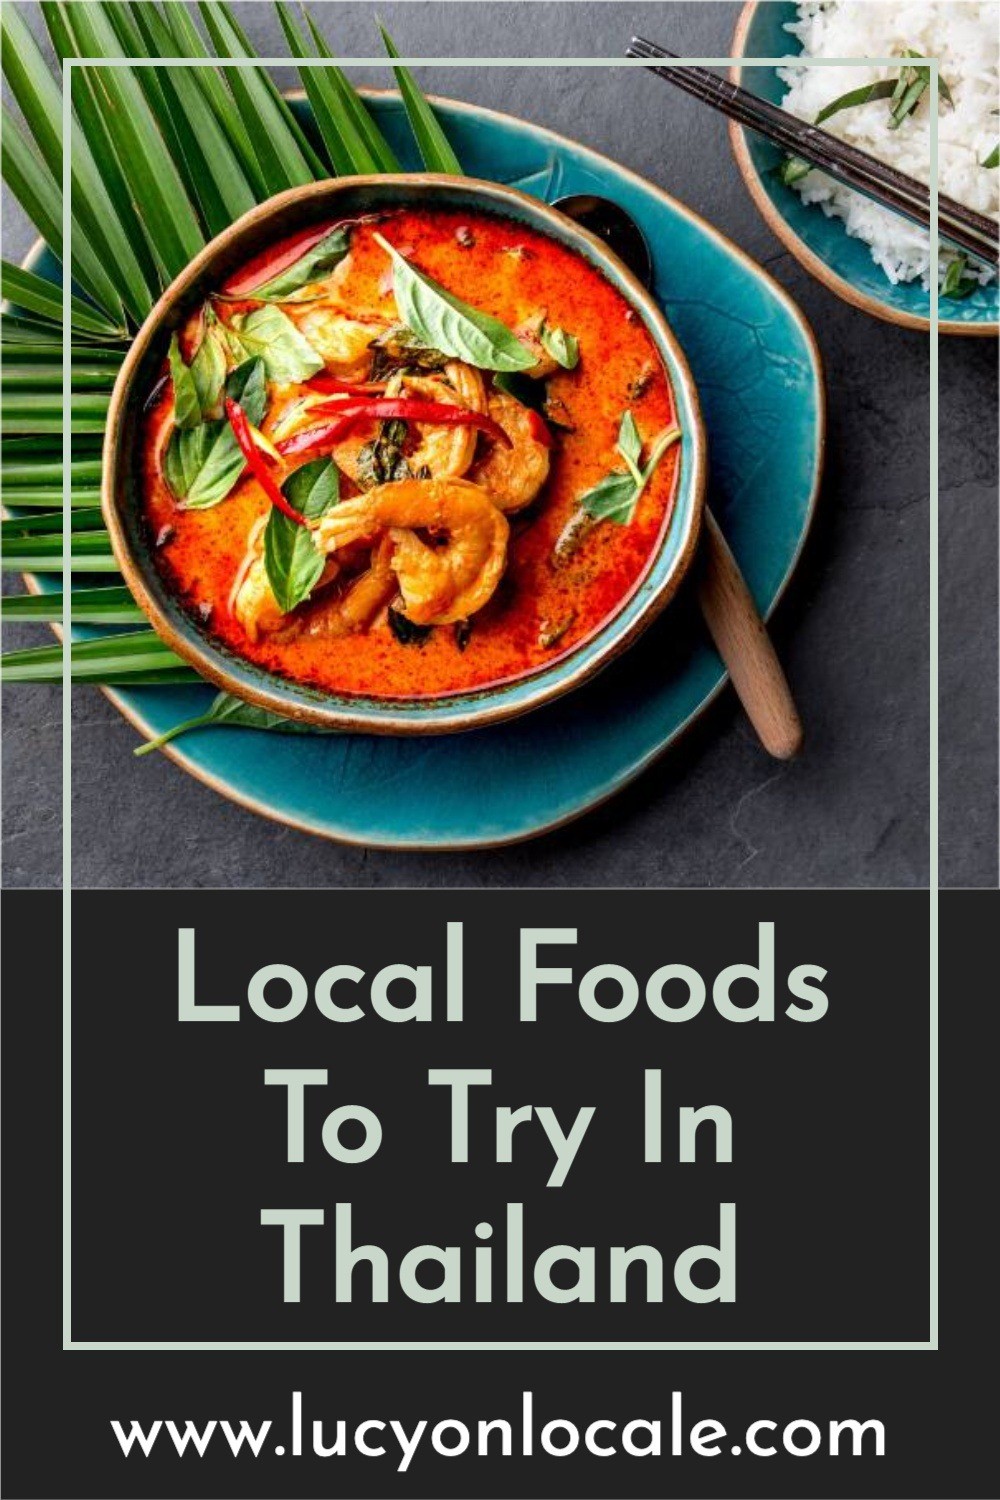 10 Local Foods To Try In Thailand